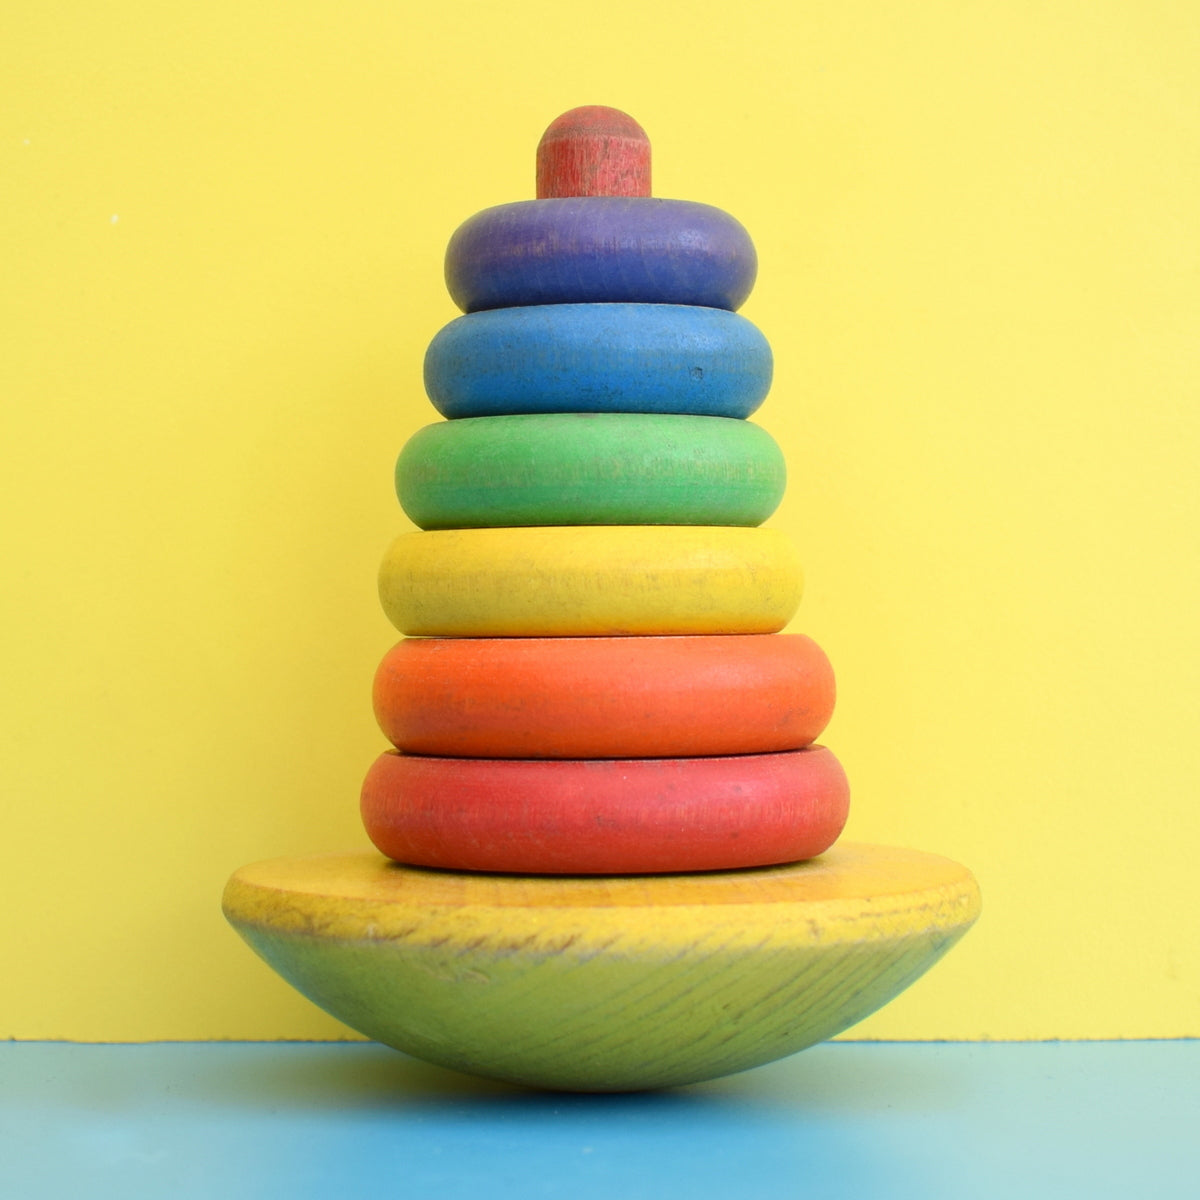 Vintage 1960s Wooden Stacking Rocking Ring Toy - Rainbow